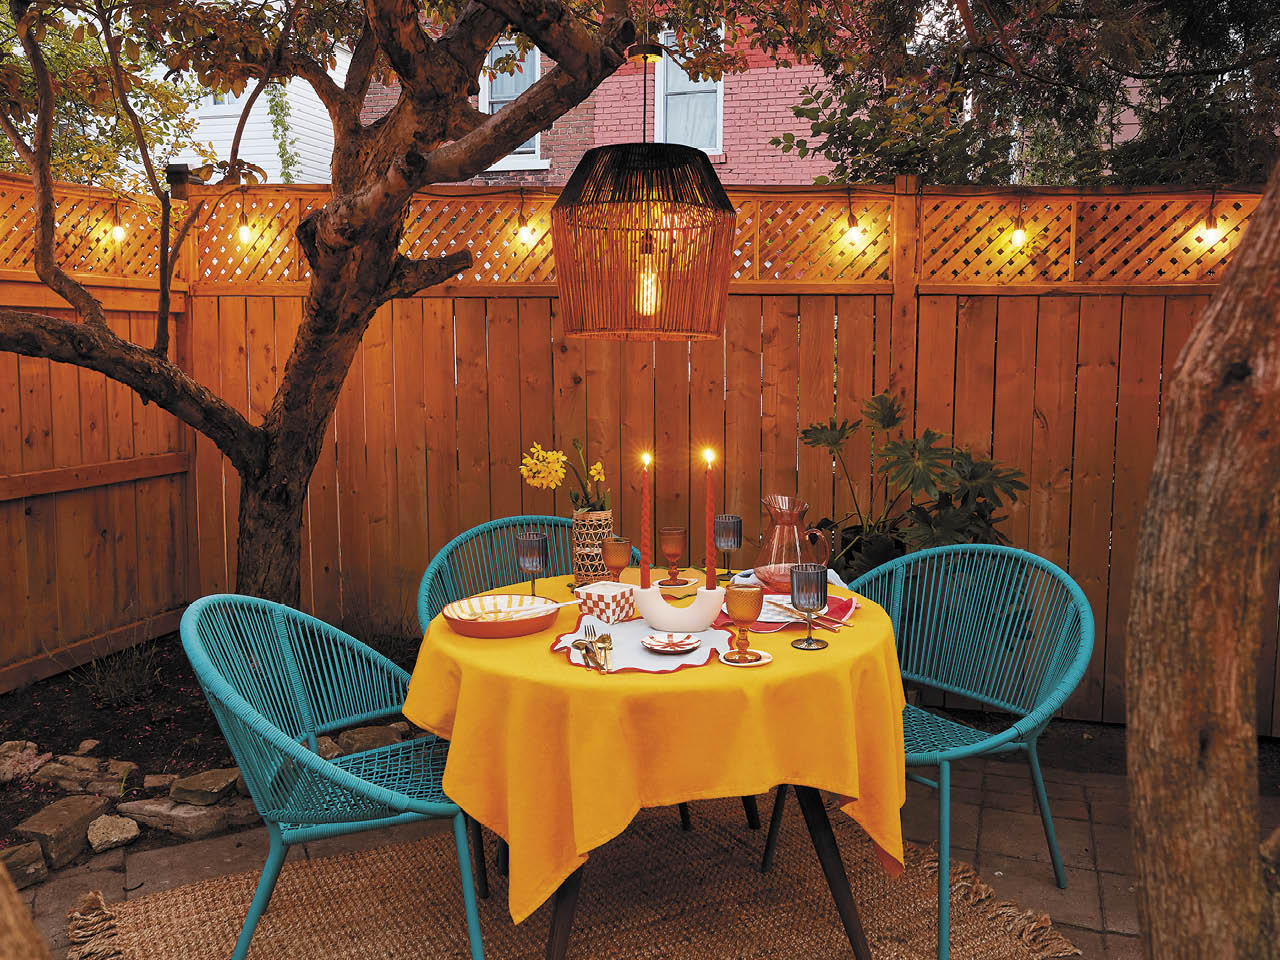 A table set outdoors in a backyard with a solar-powered outdoor pendant light hanging above from a tree.